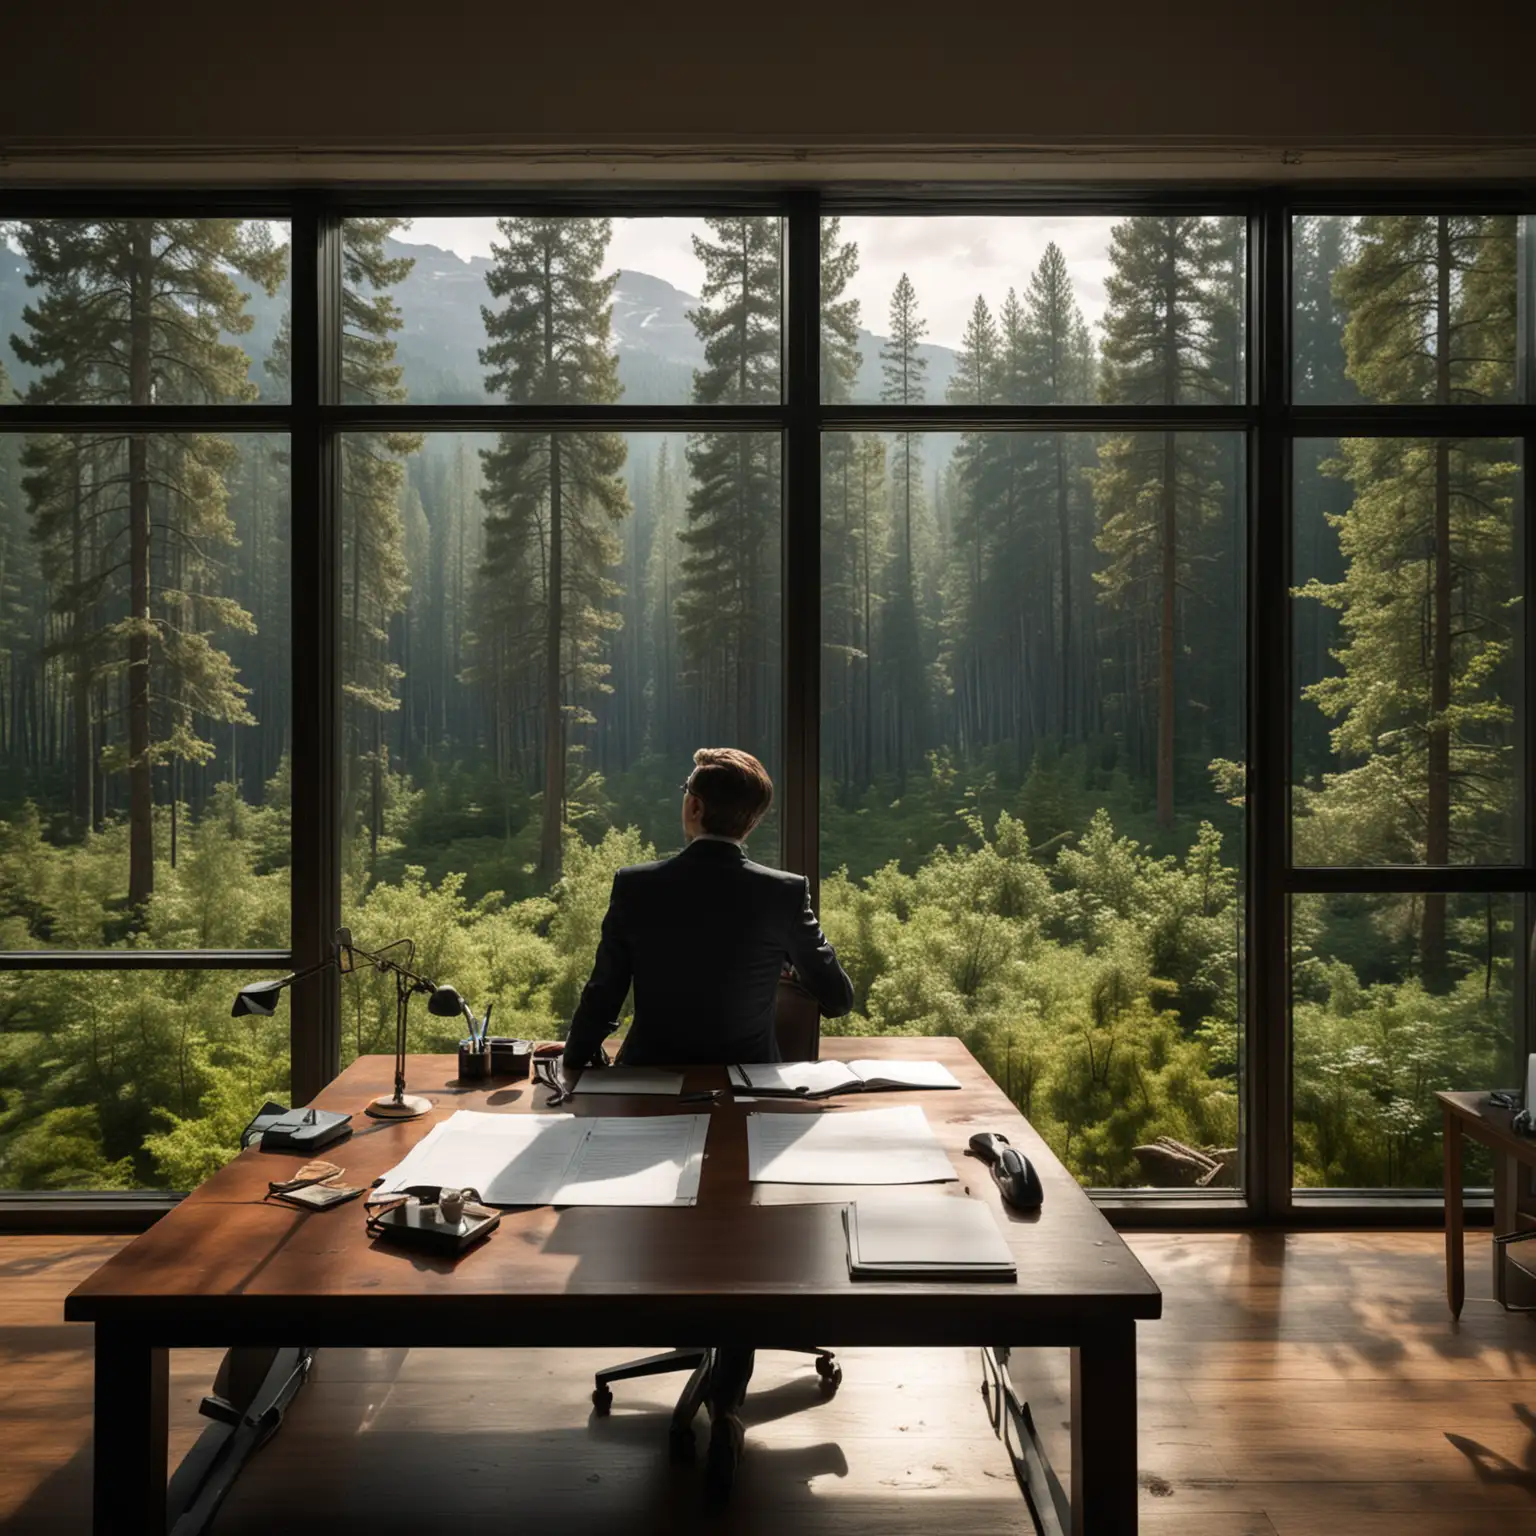 a physicist sitting at a desk in a study, wearing a suit and looking out of the window at the scenery, the scenery is a forest